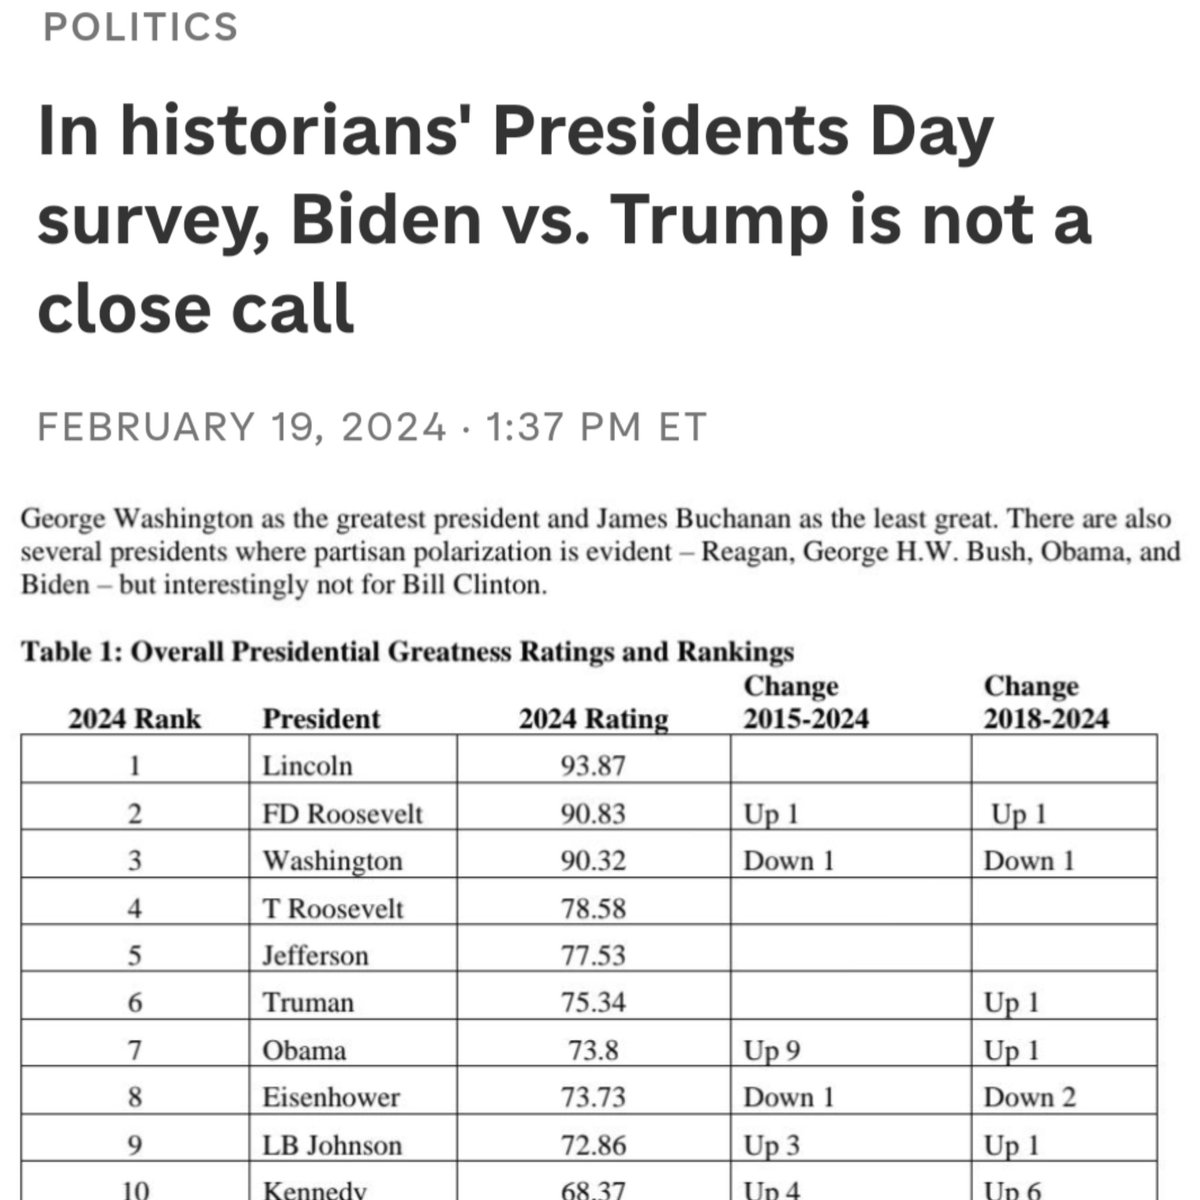 Coincidence that #PresidentsDay is the date in history #FDR ordered Asian *AMERICANS* into camps?

University history professors voted again this year on our nations best leaders. They rank FDR 2nd best president ever. 

Higher education is a joke. 

Oh, #Trump came in last.